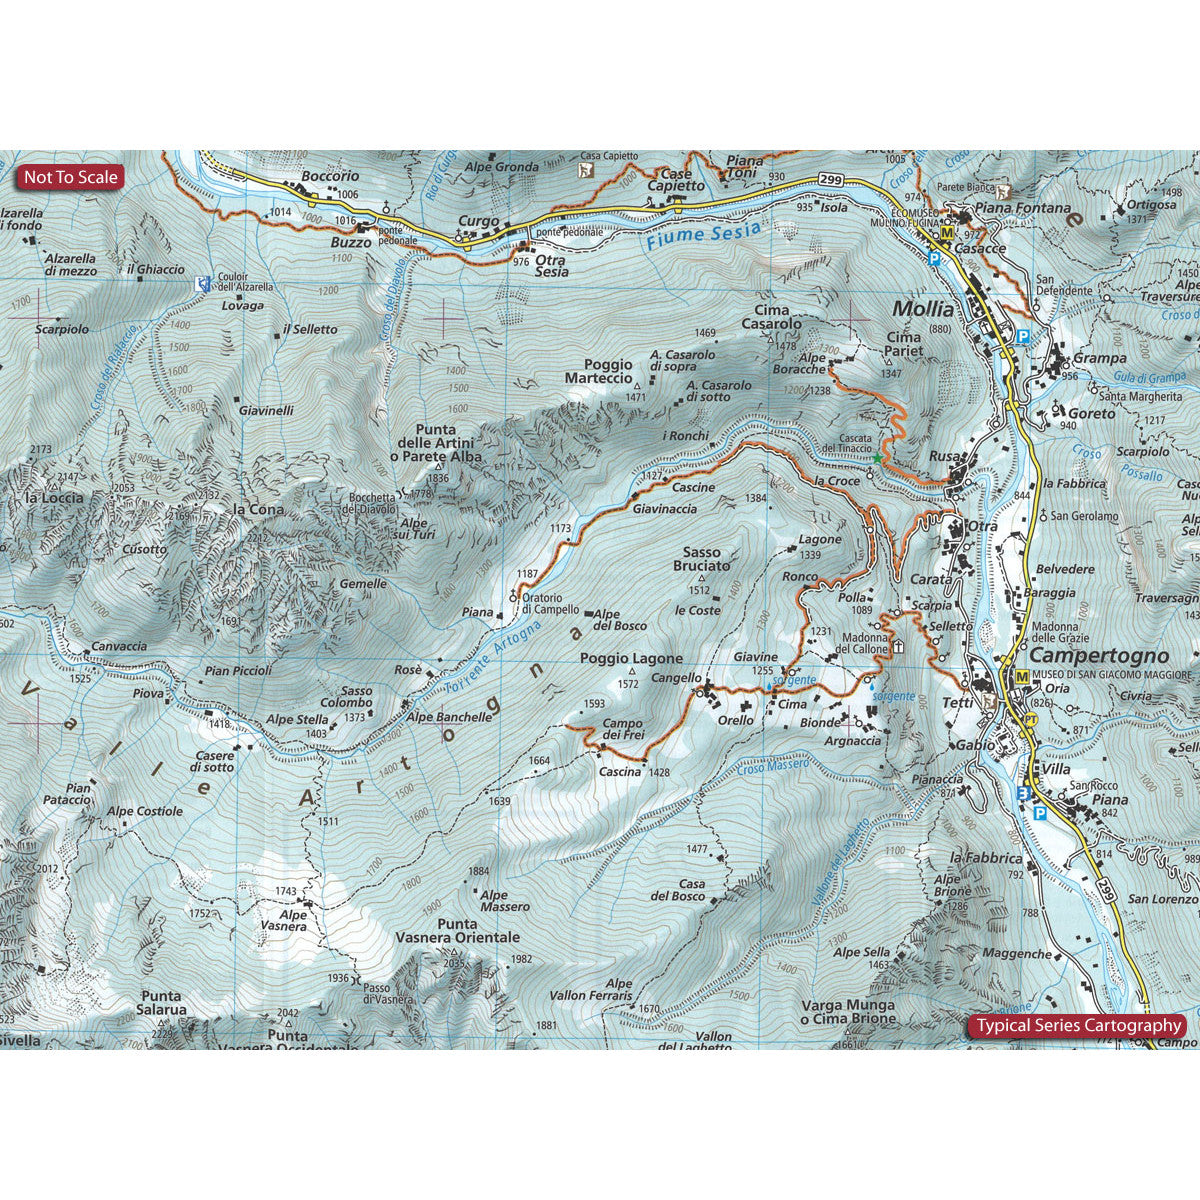 Monte Rosa Ski Touring Map Geo4map | Backcountry Books